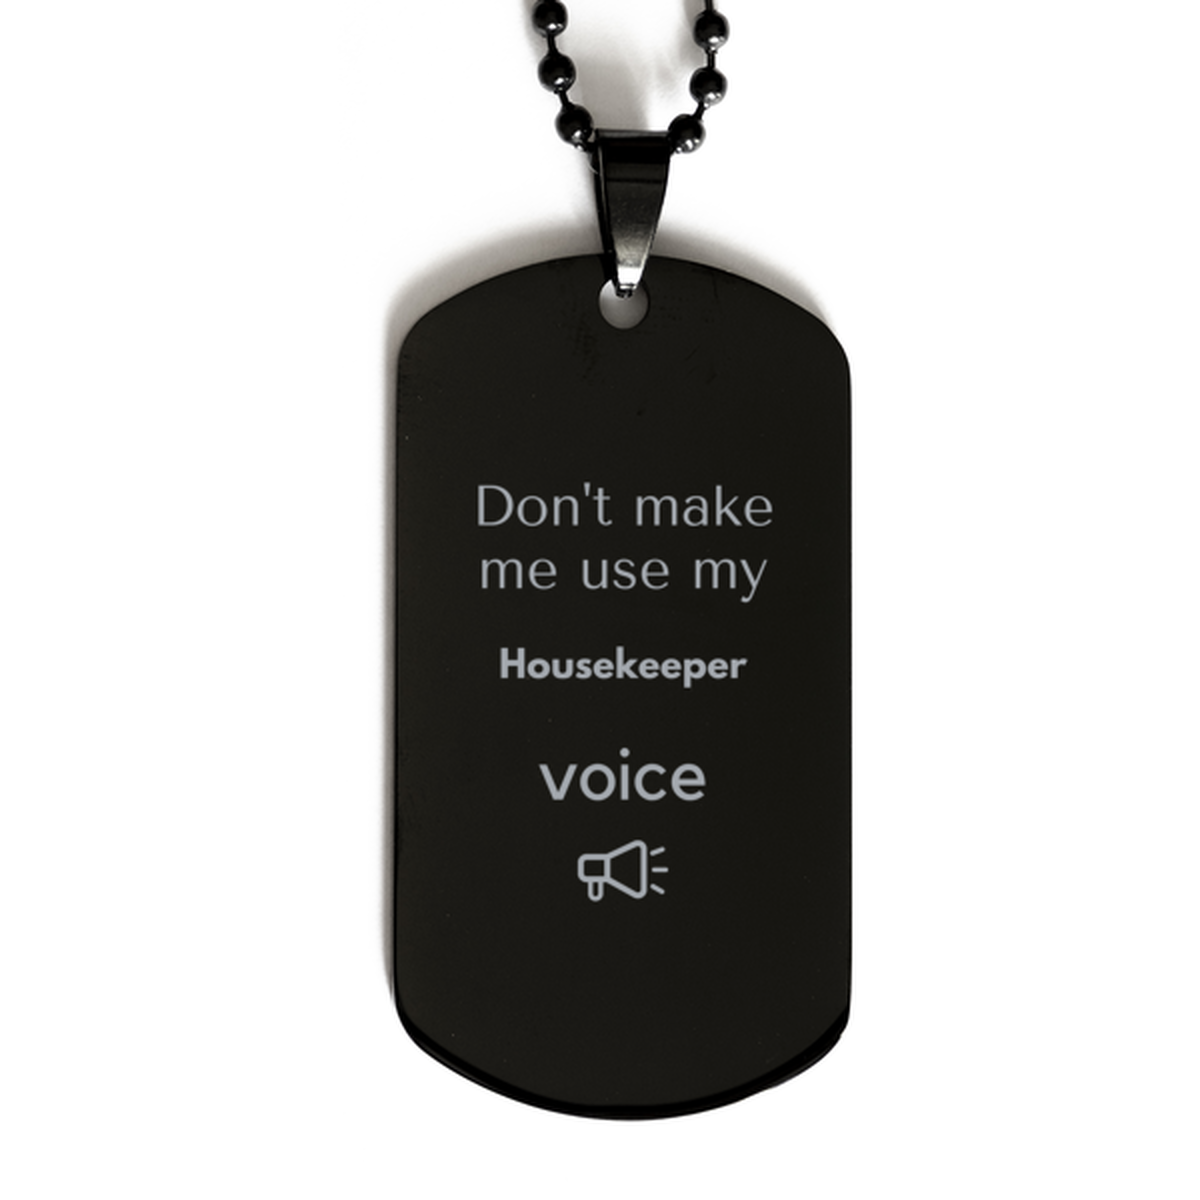 Don't make me use my Housekeeper voice, Sarcasm Housekeeper Gifts, Christmas Housekeeper Black Dog Tag Birthday Unique Gifts For Housekeeper Coworkers, Men, Women, Colleague, Friends